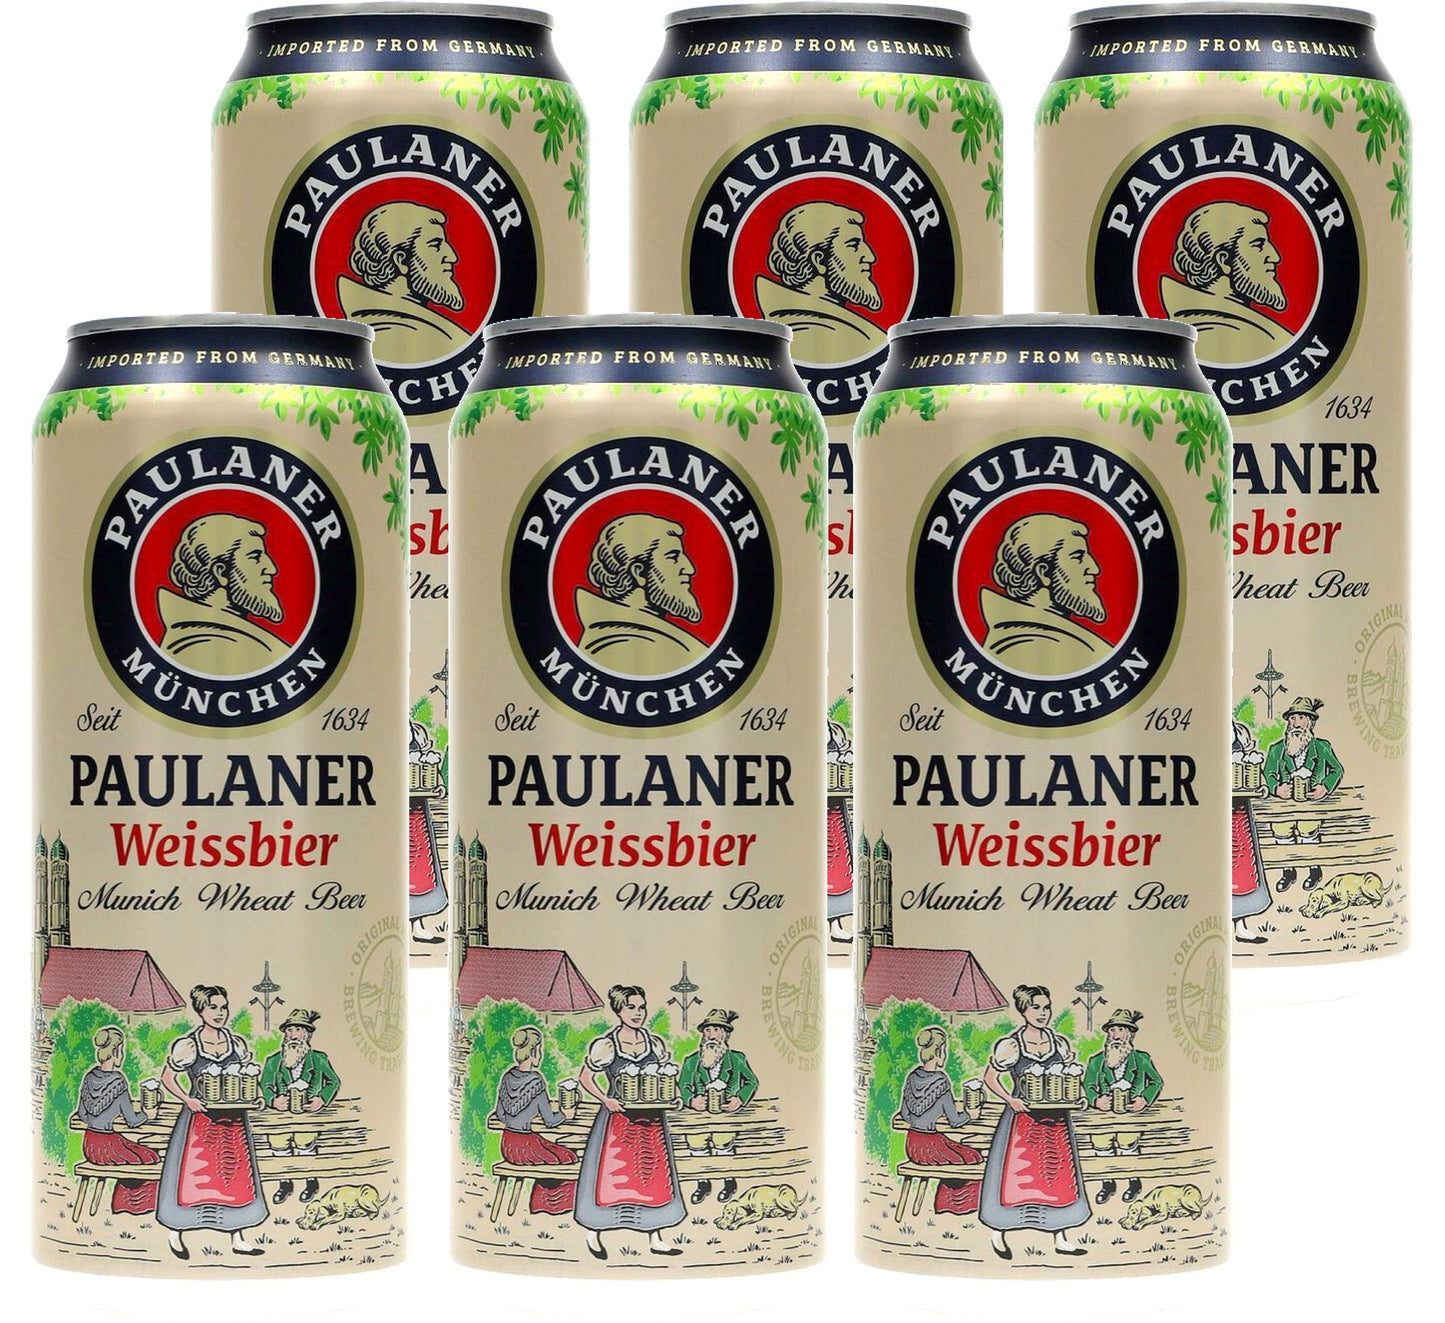 Paulaner Weissbier - 5.5% abv - Canned Version